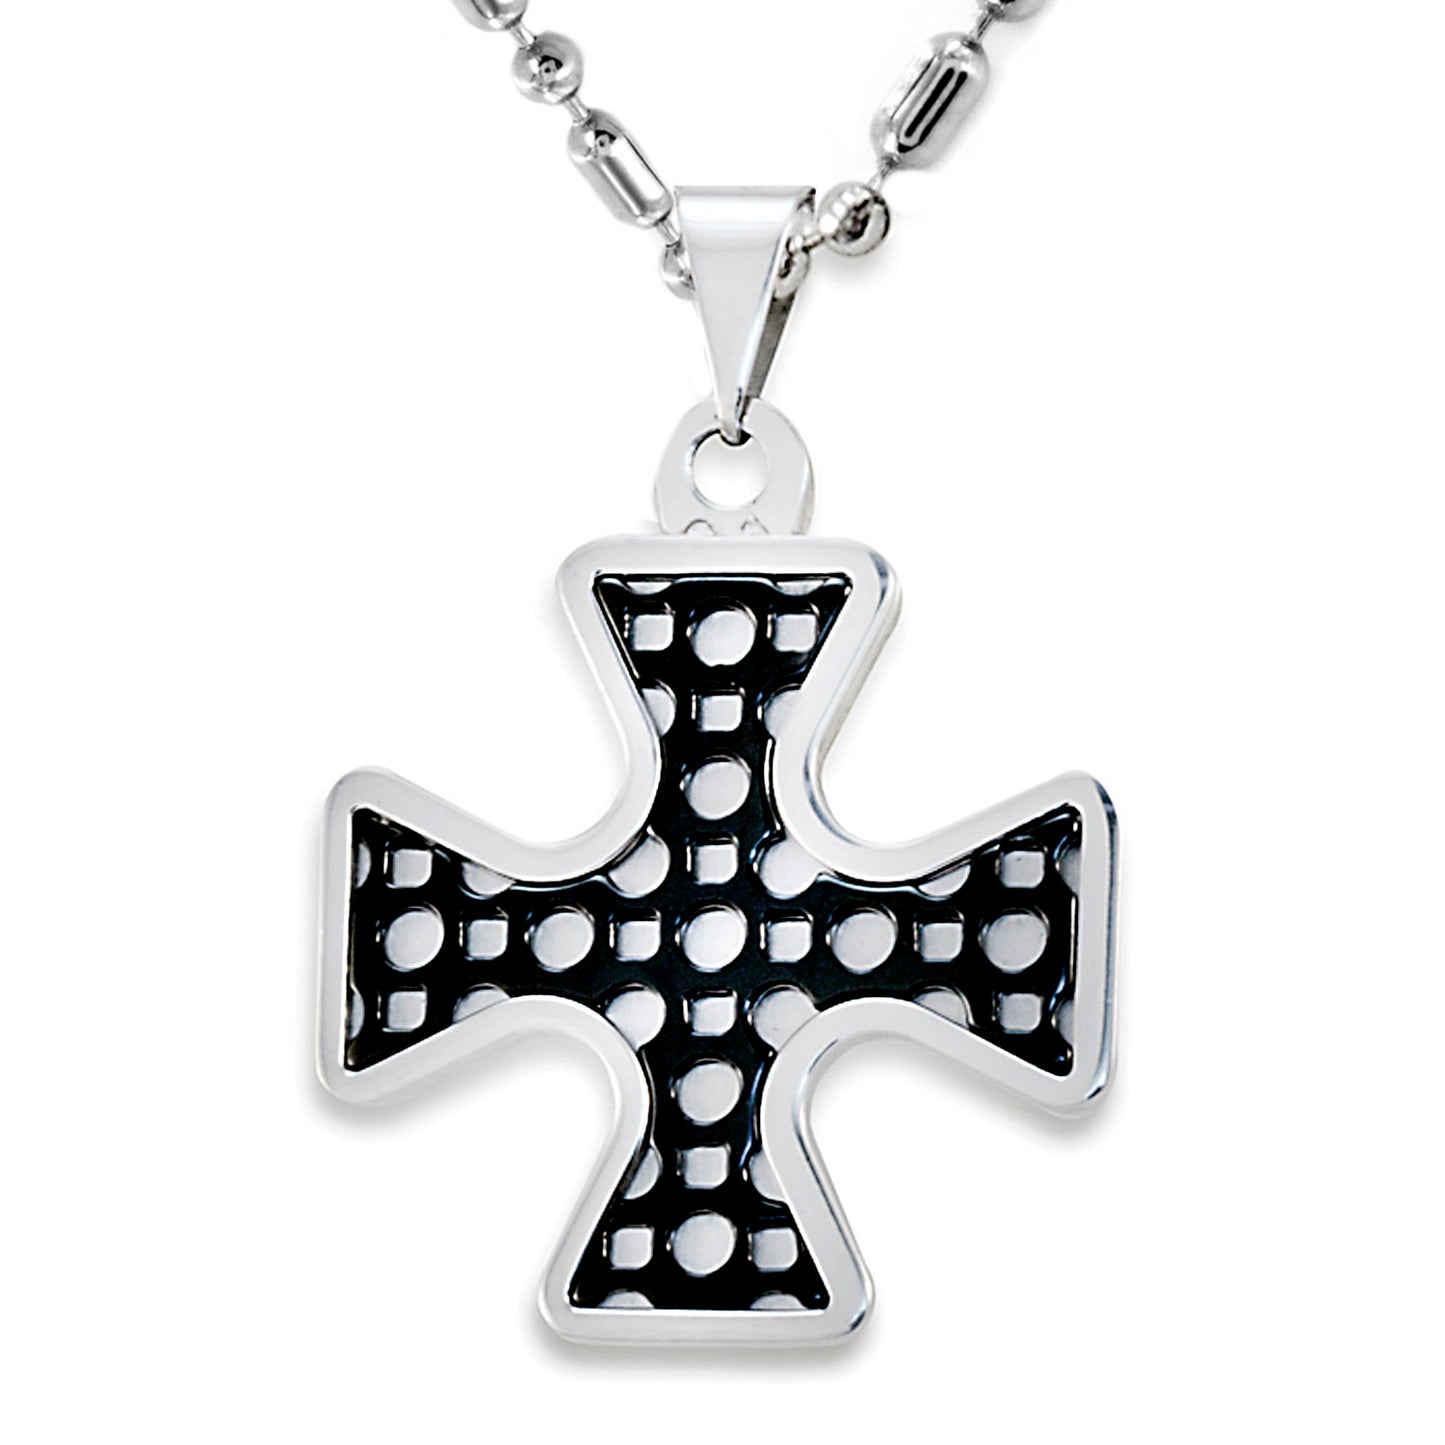 Men's Two-Tone Stainless Steel Cross Pendant Necklace - 24"